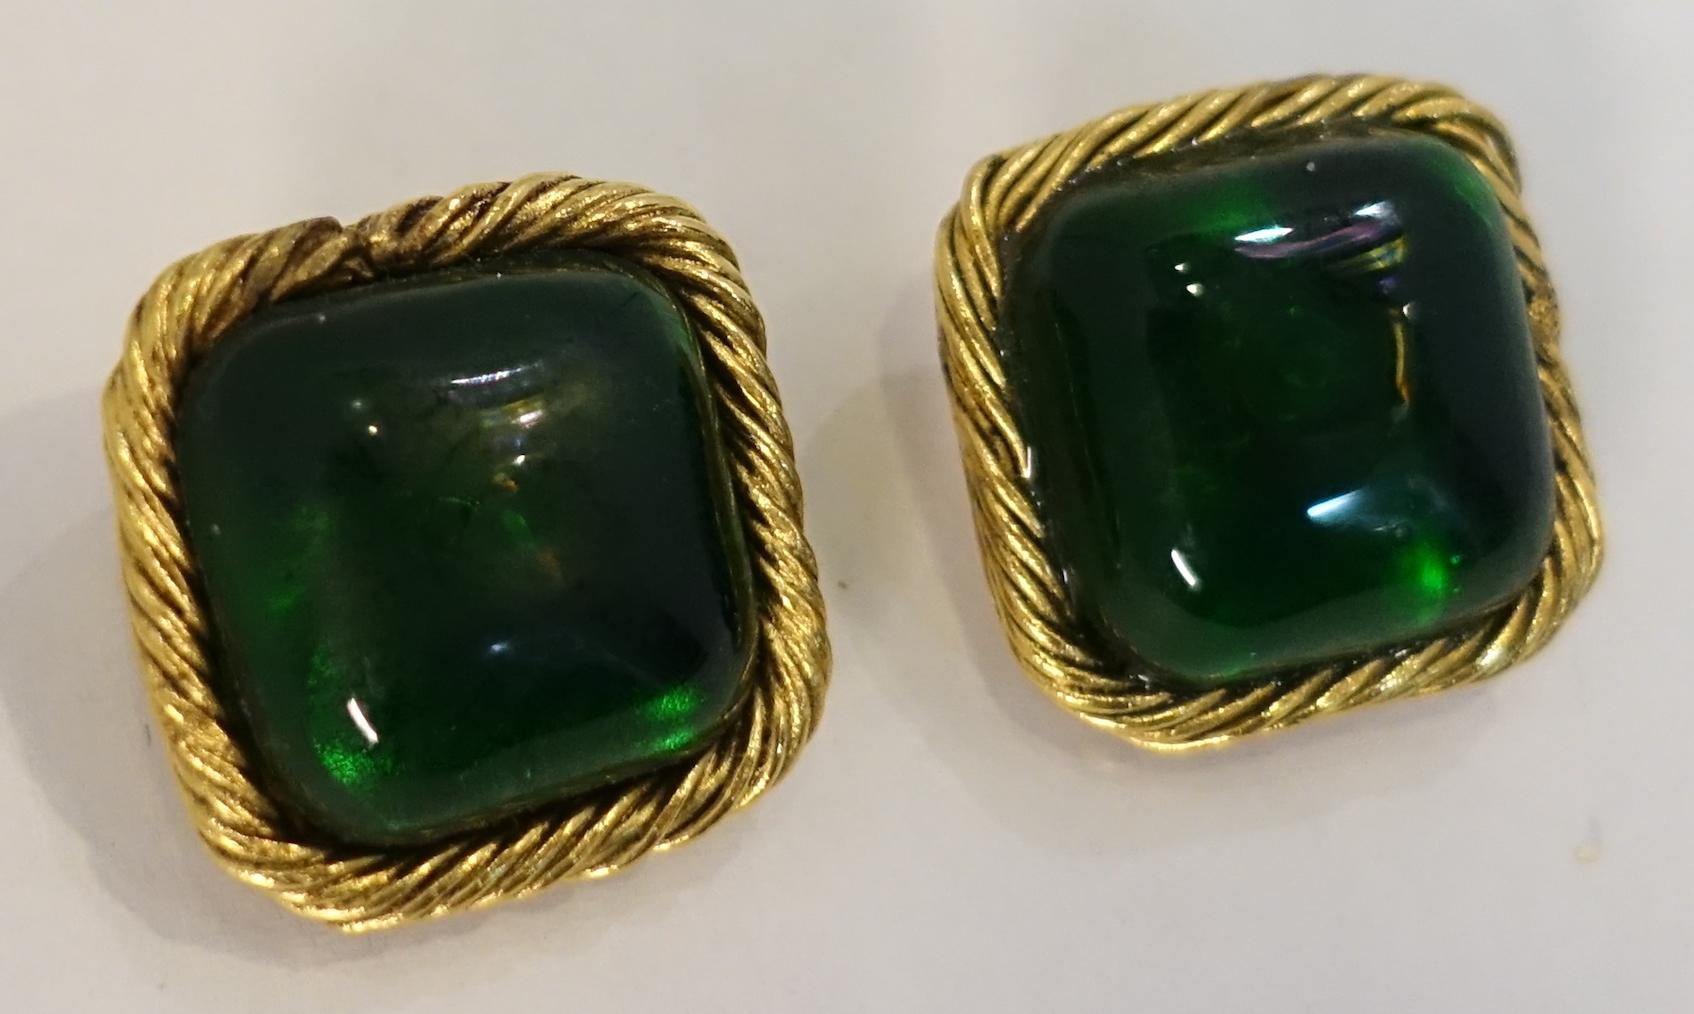 These vintage Chanel earrings are designed with beautiful emerald green Gripoix glass centers bezel into a ribbed gold tone border.  In excellent condition, these clip earrings measure 1” and are signed “Chanel 23 Made in France”.